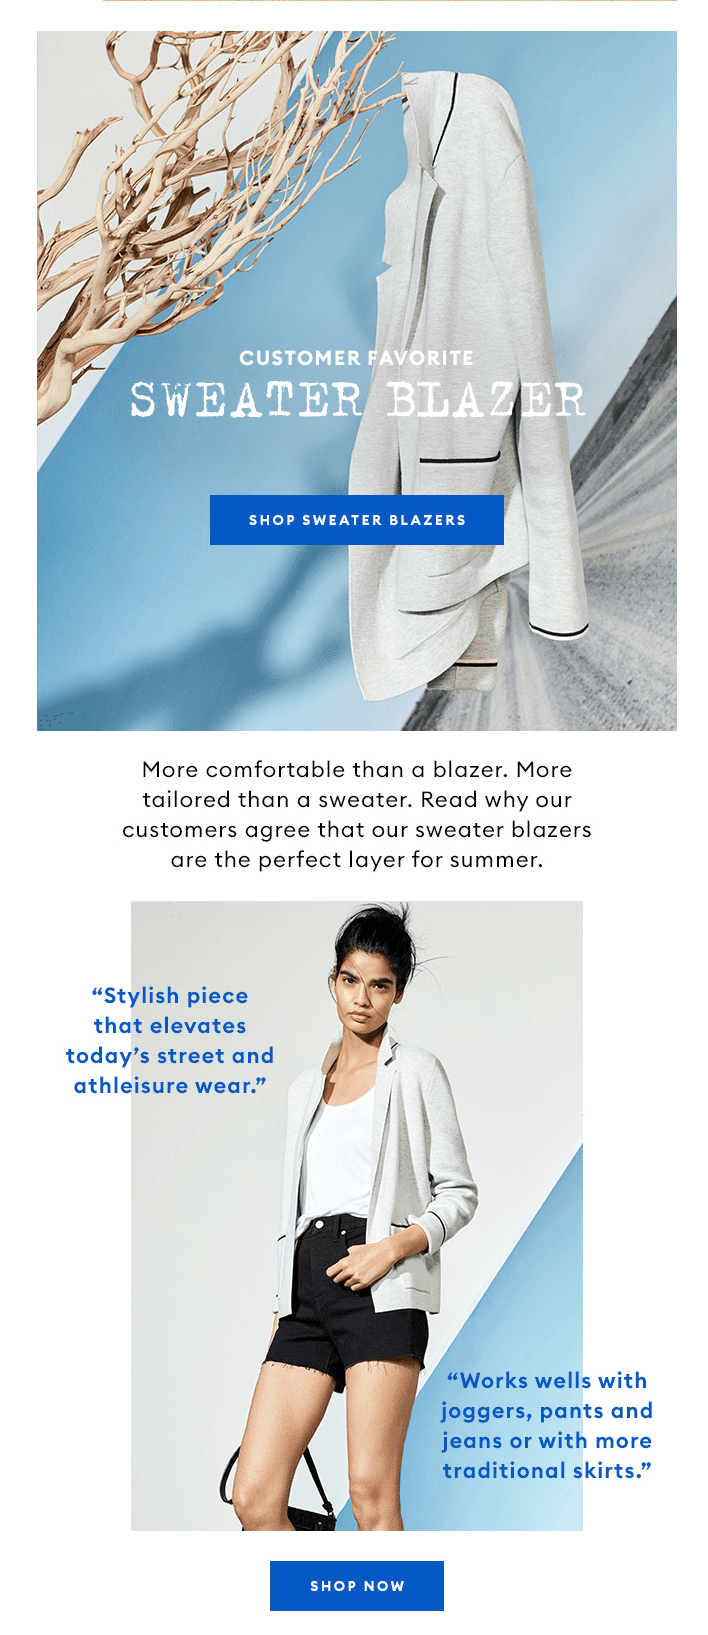 Newsletter examples _ Weekly Digest by Banana Republic